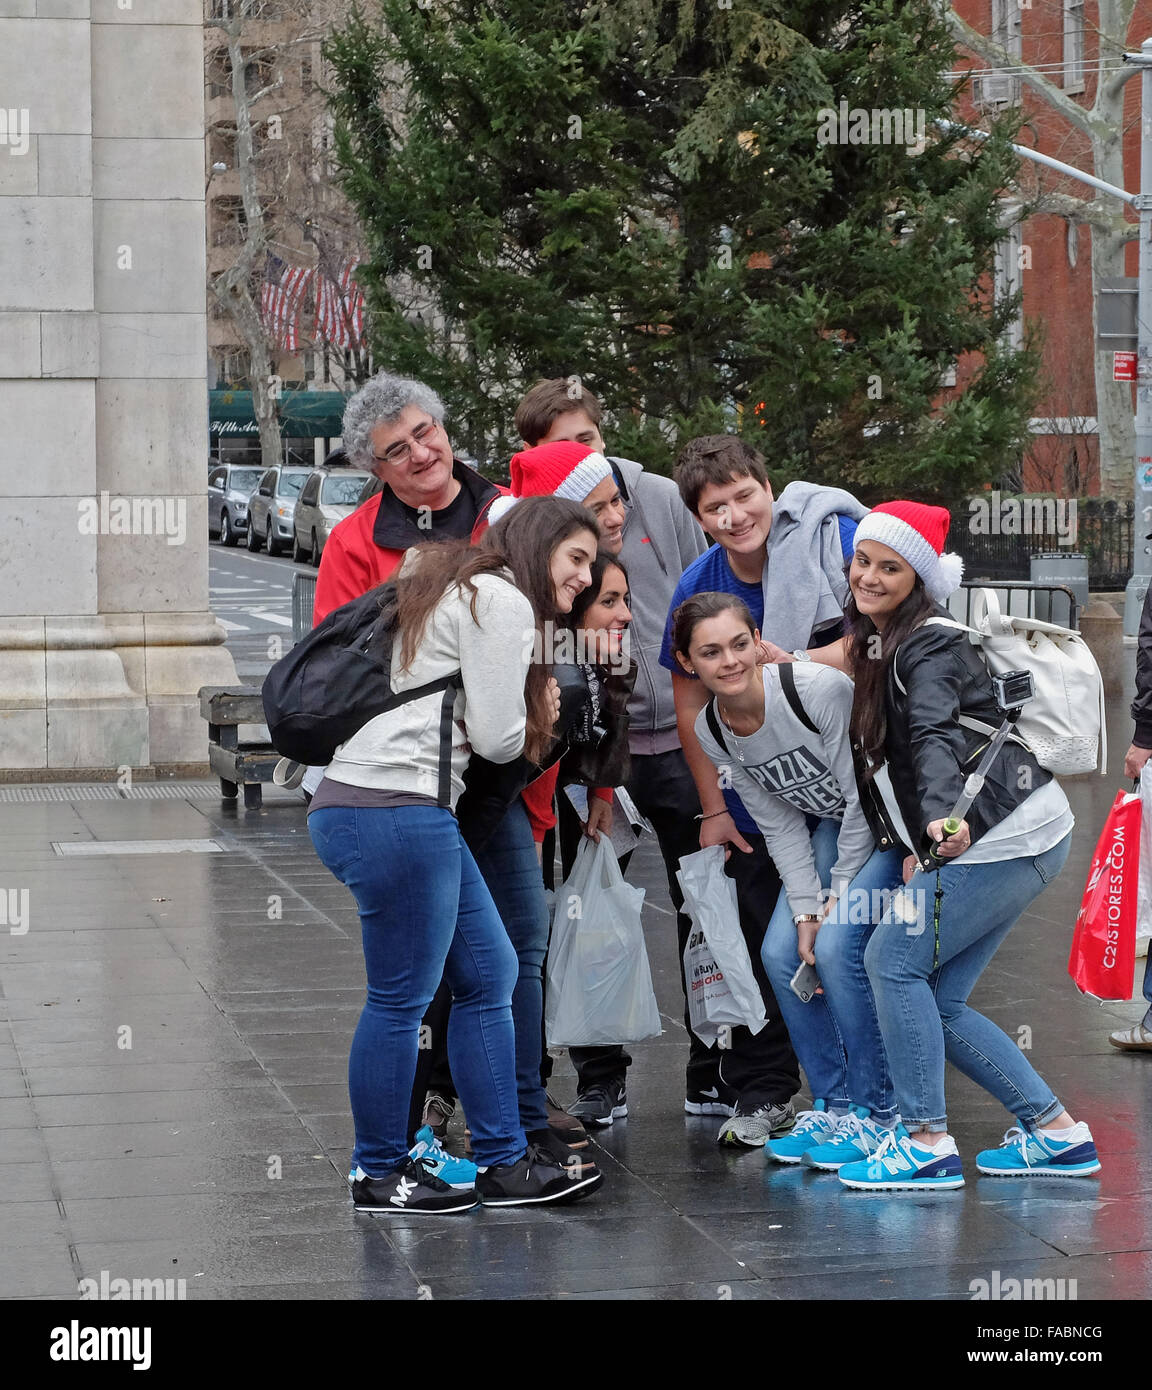 A family of tourists visiting New York pose for a selfie in front of a Christmas tree in Washington Square Park in New York City Stock Photo